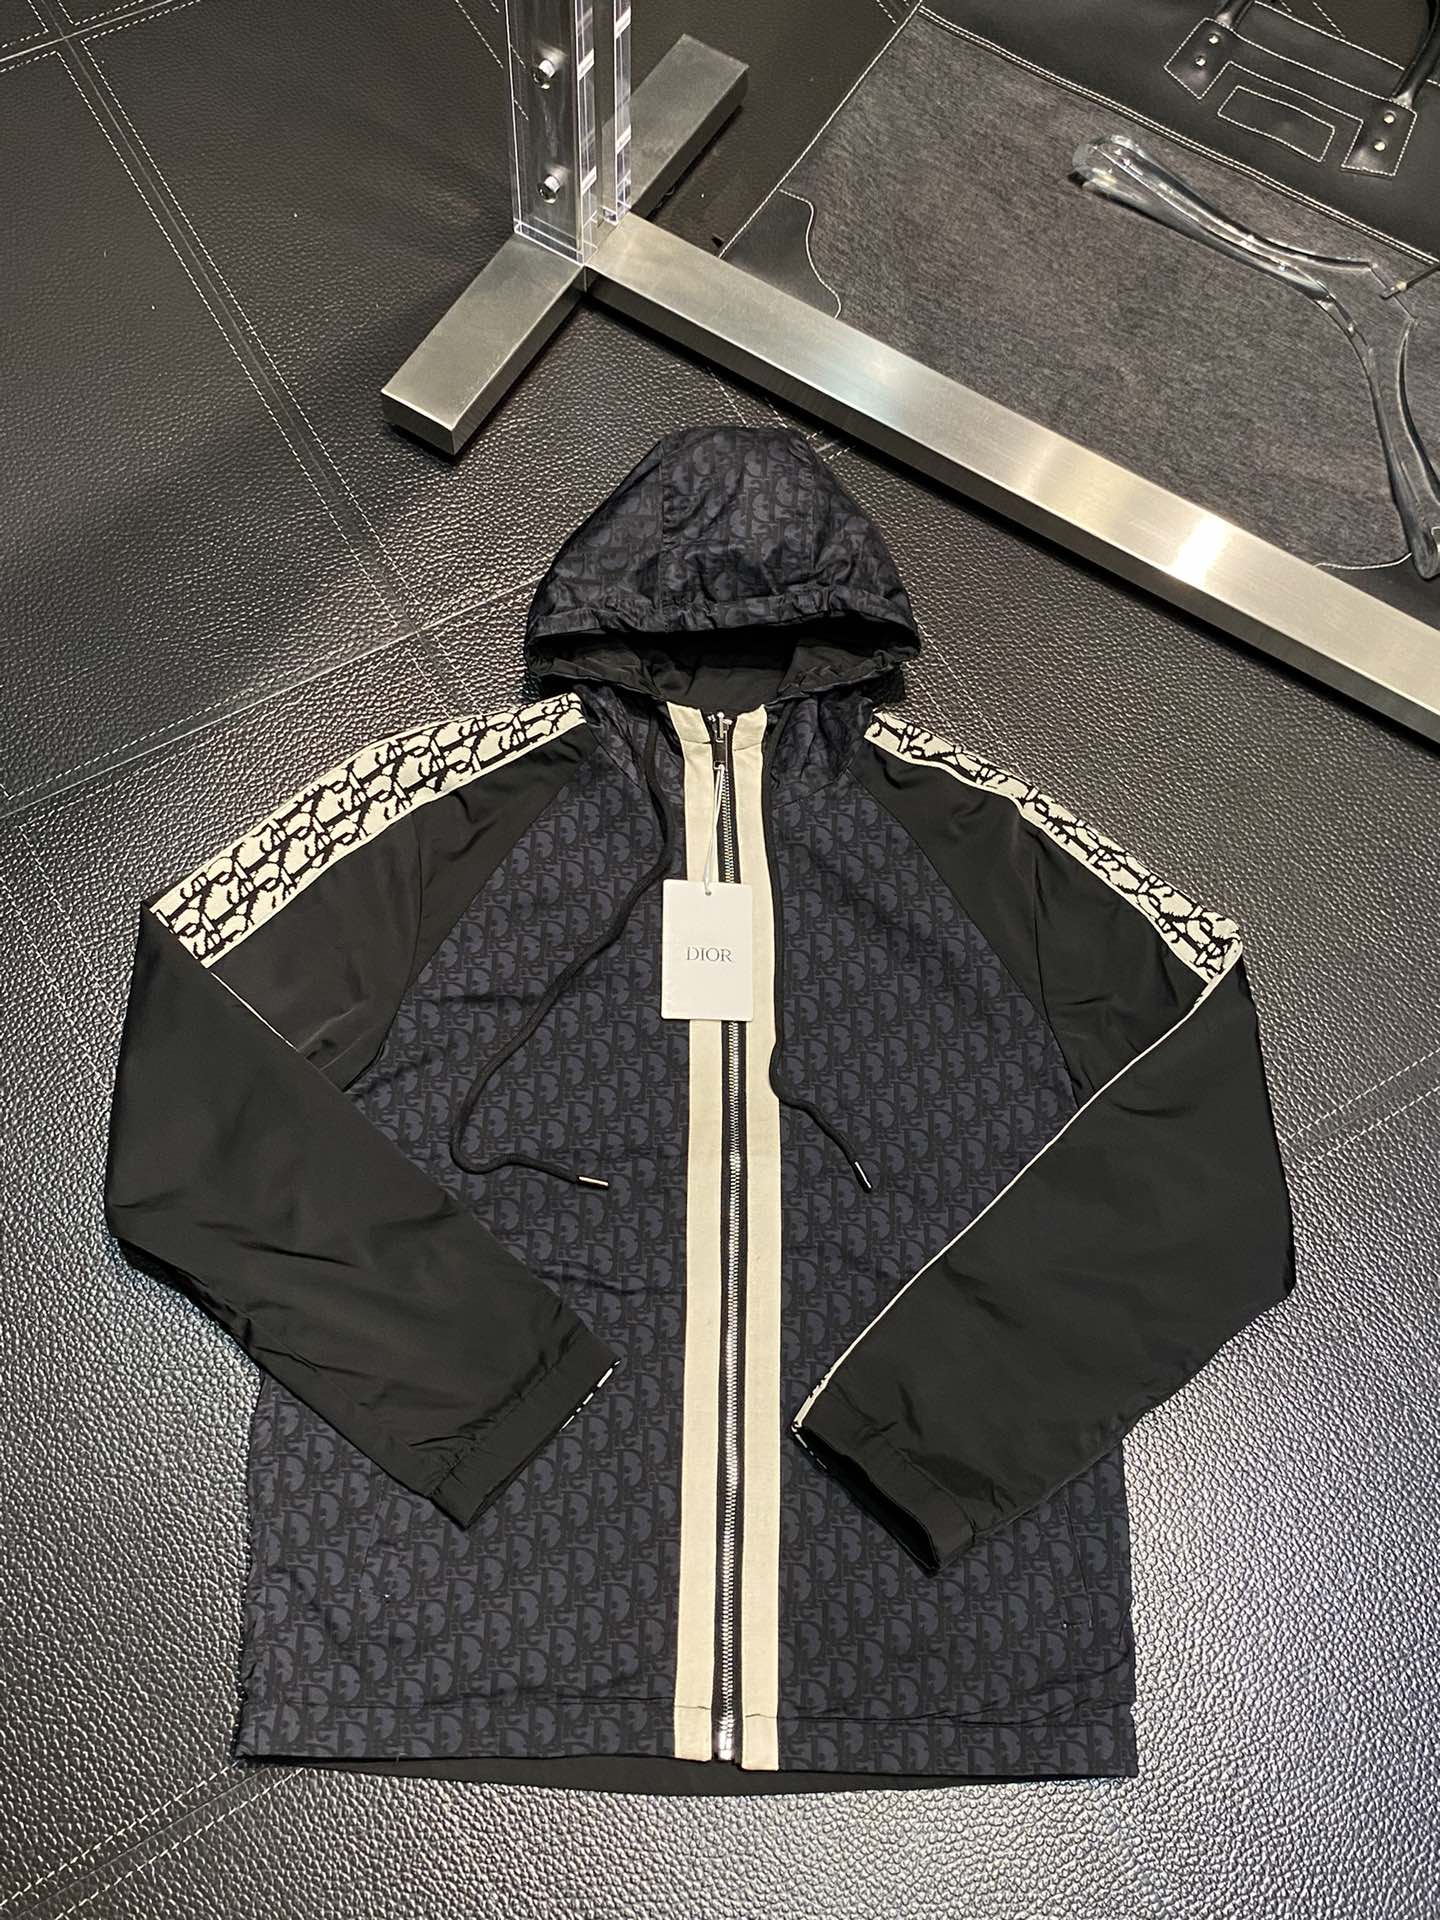 Gucci mirror quality
 Clothing Coats & Jackets Men Fashion Hooded Top